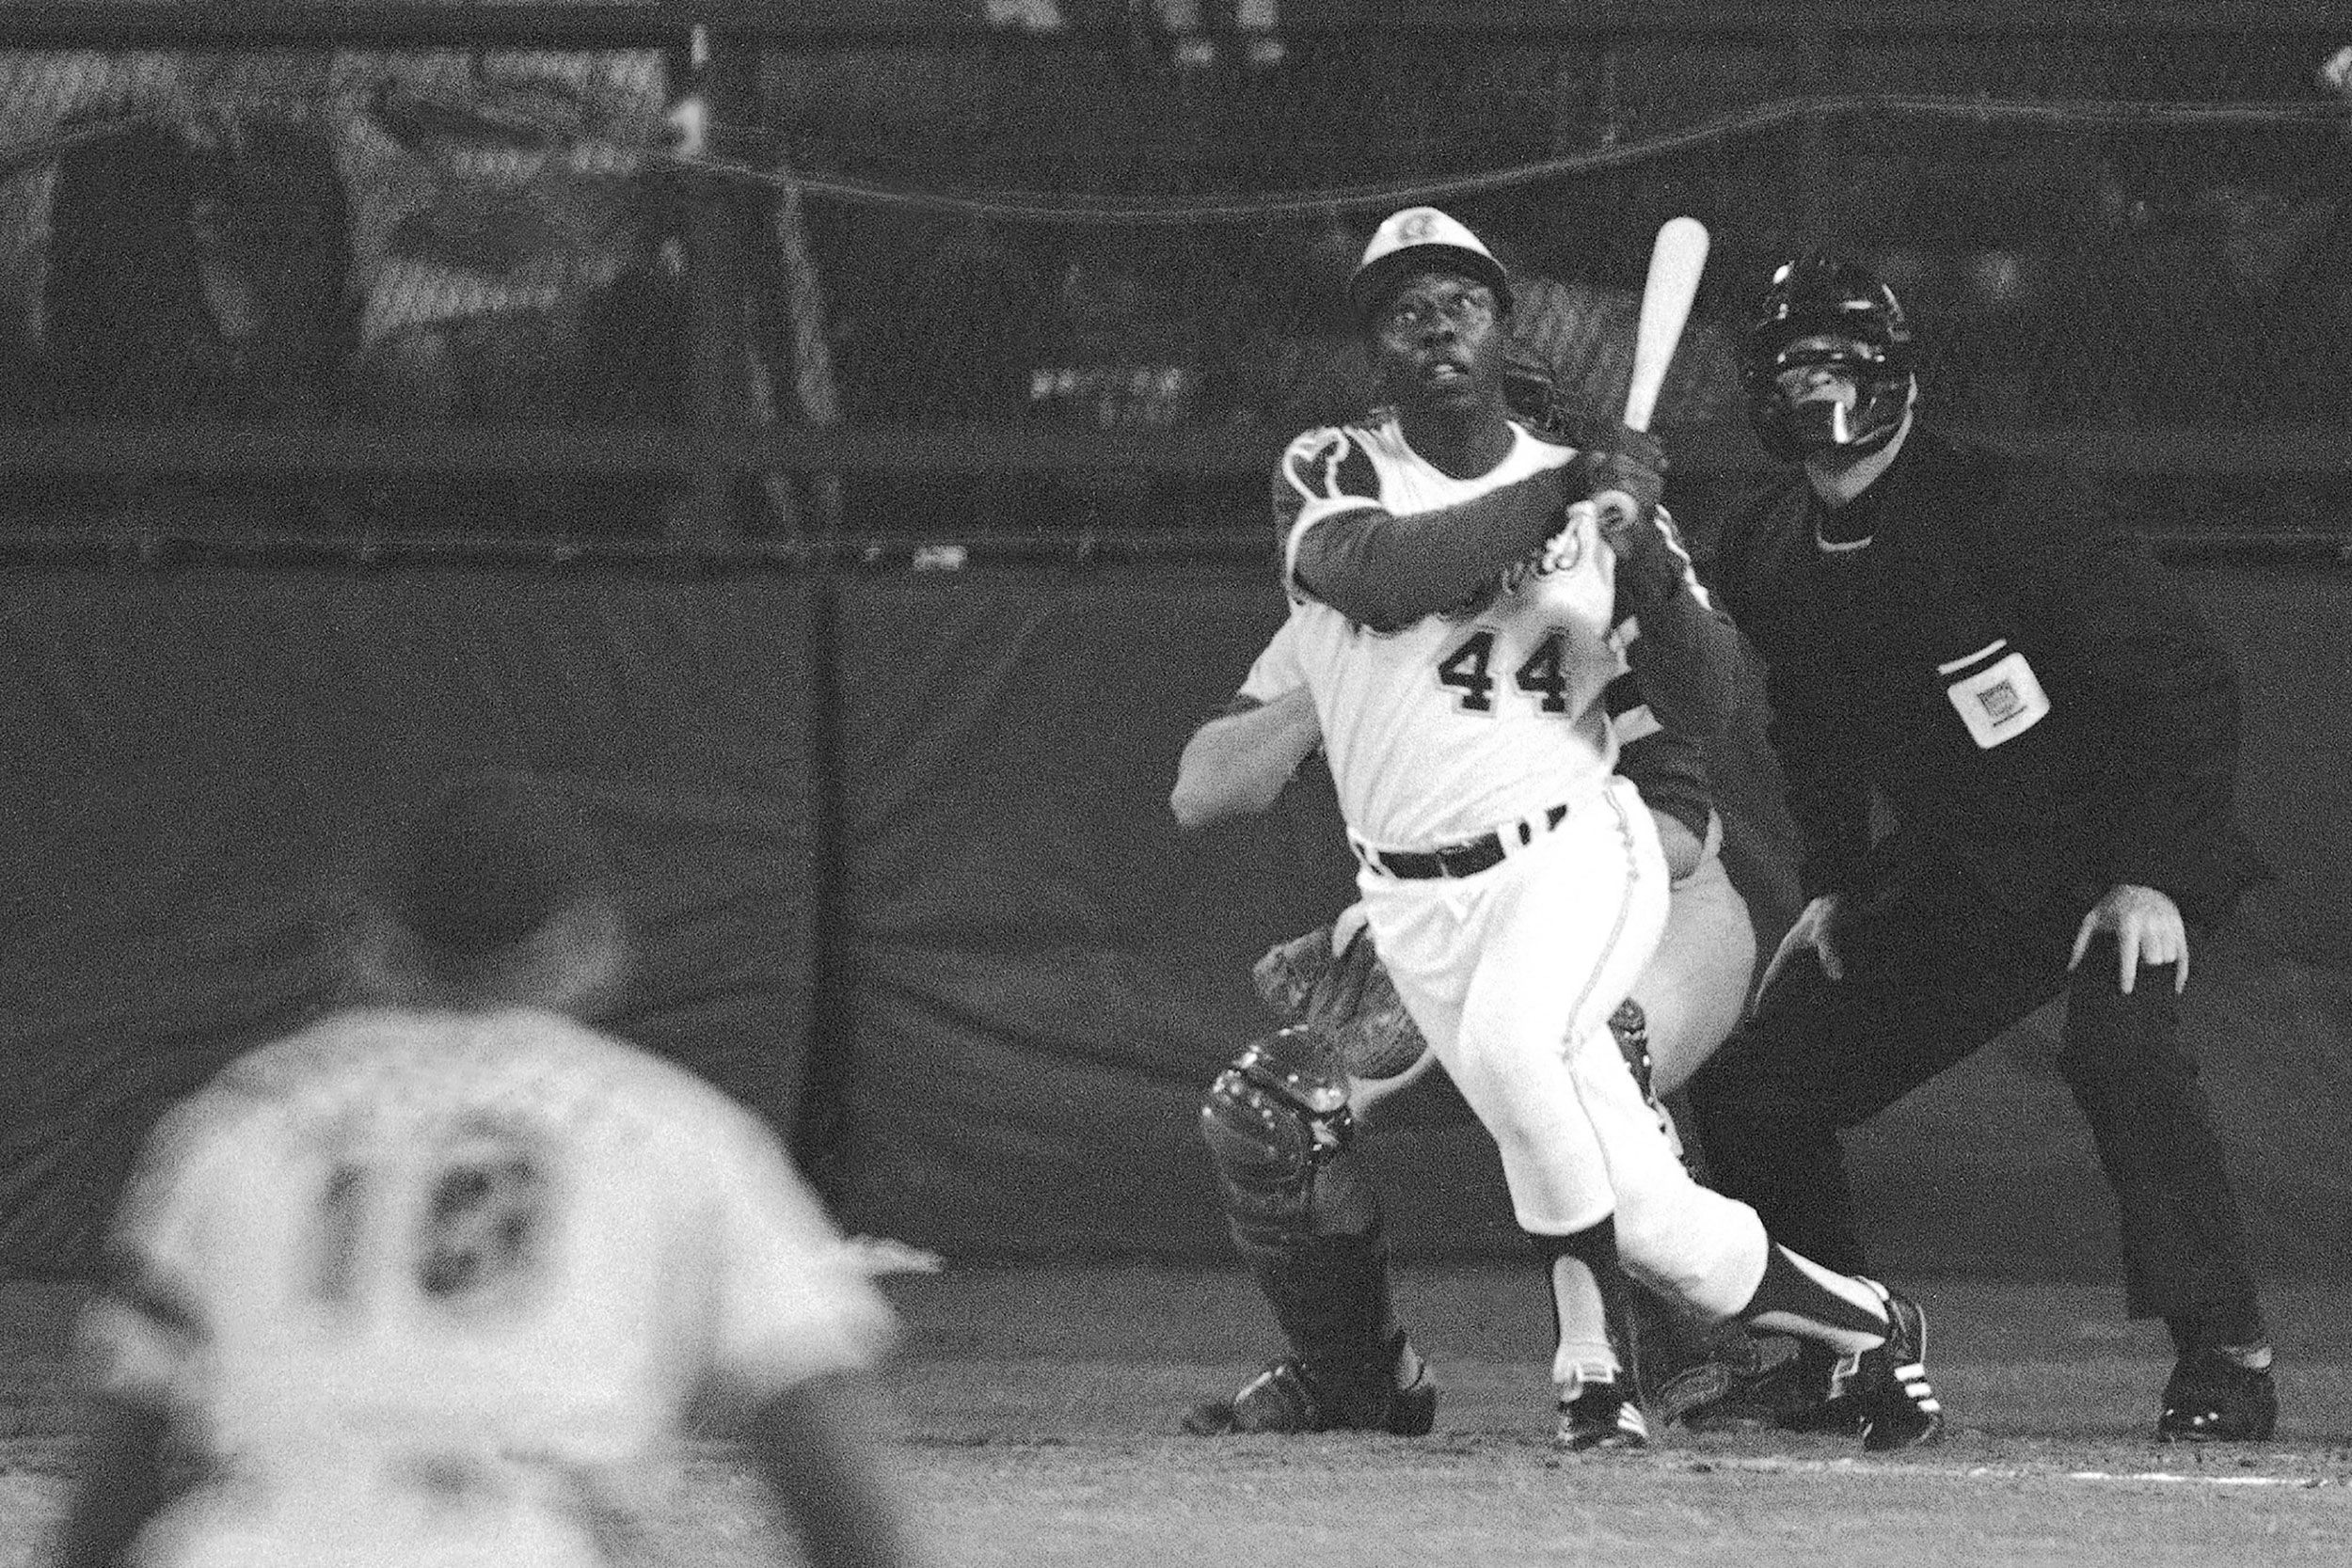 Hank Aaron is dead. Here's Hank through the years in West Palm Beach